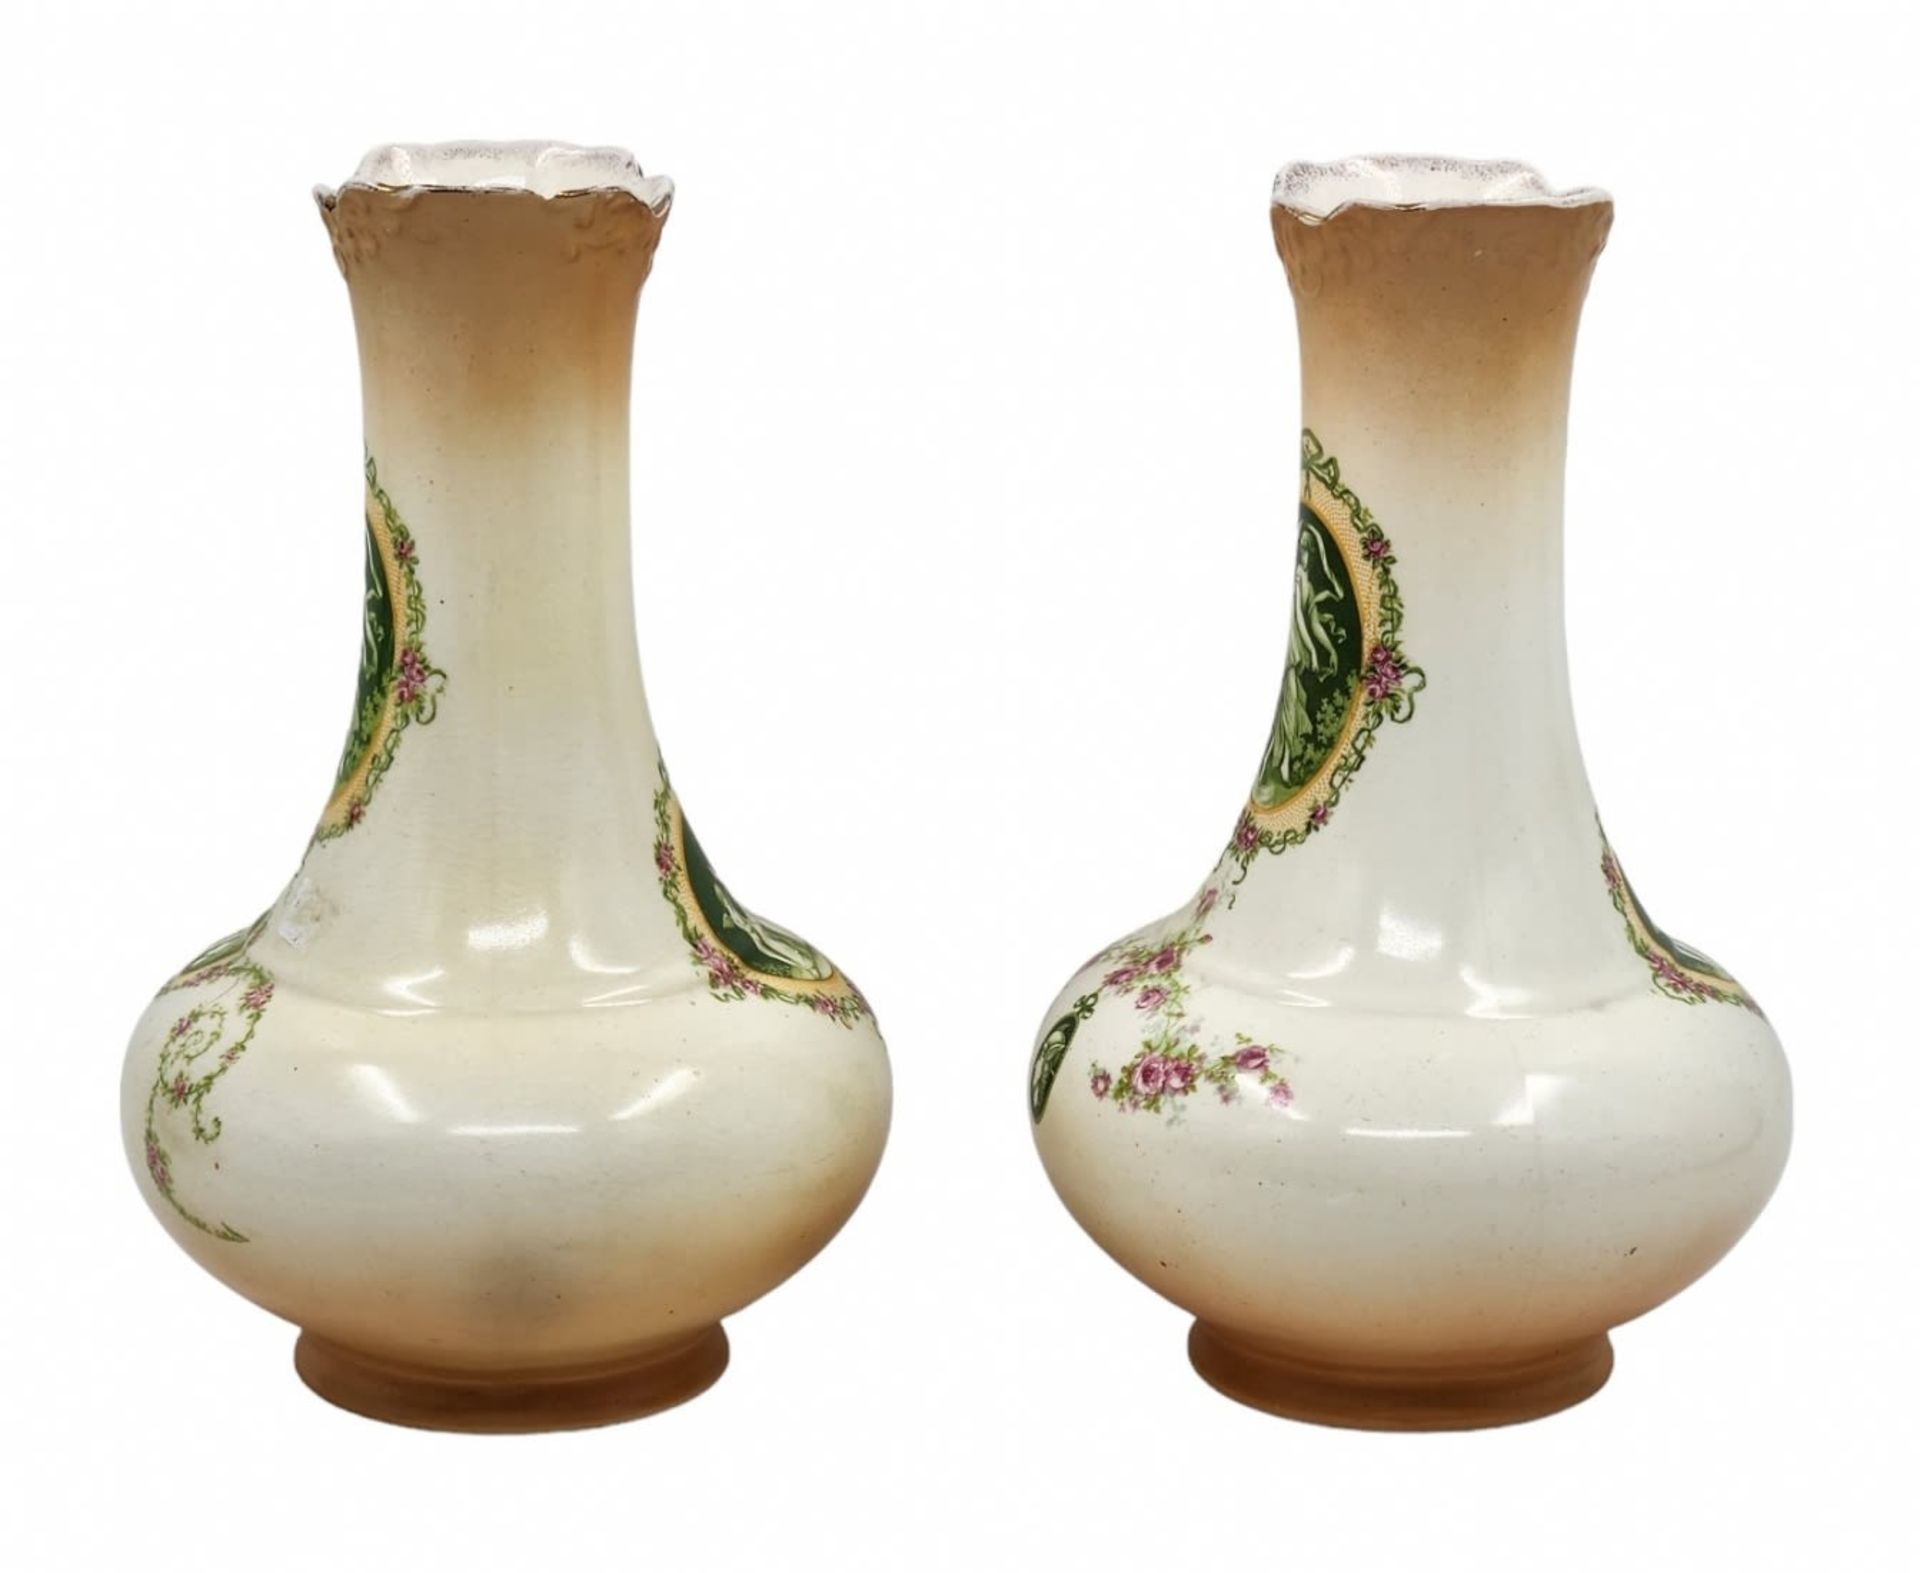 A pair of antique English jugs (Victorian) from the 19th century, made by: 'Samuel Fielding & Co - Image 3 of 5